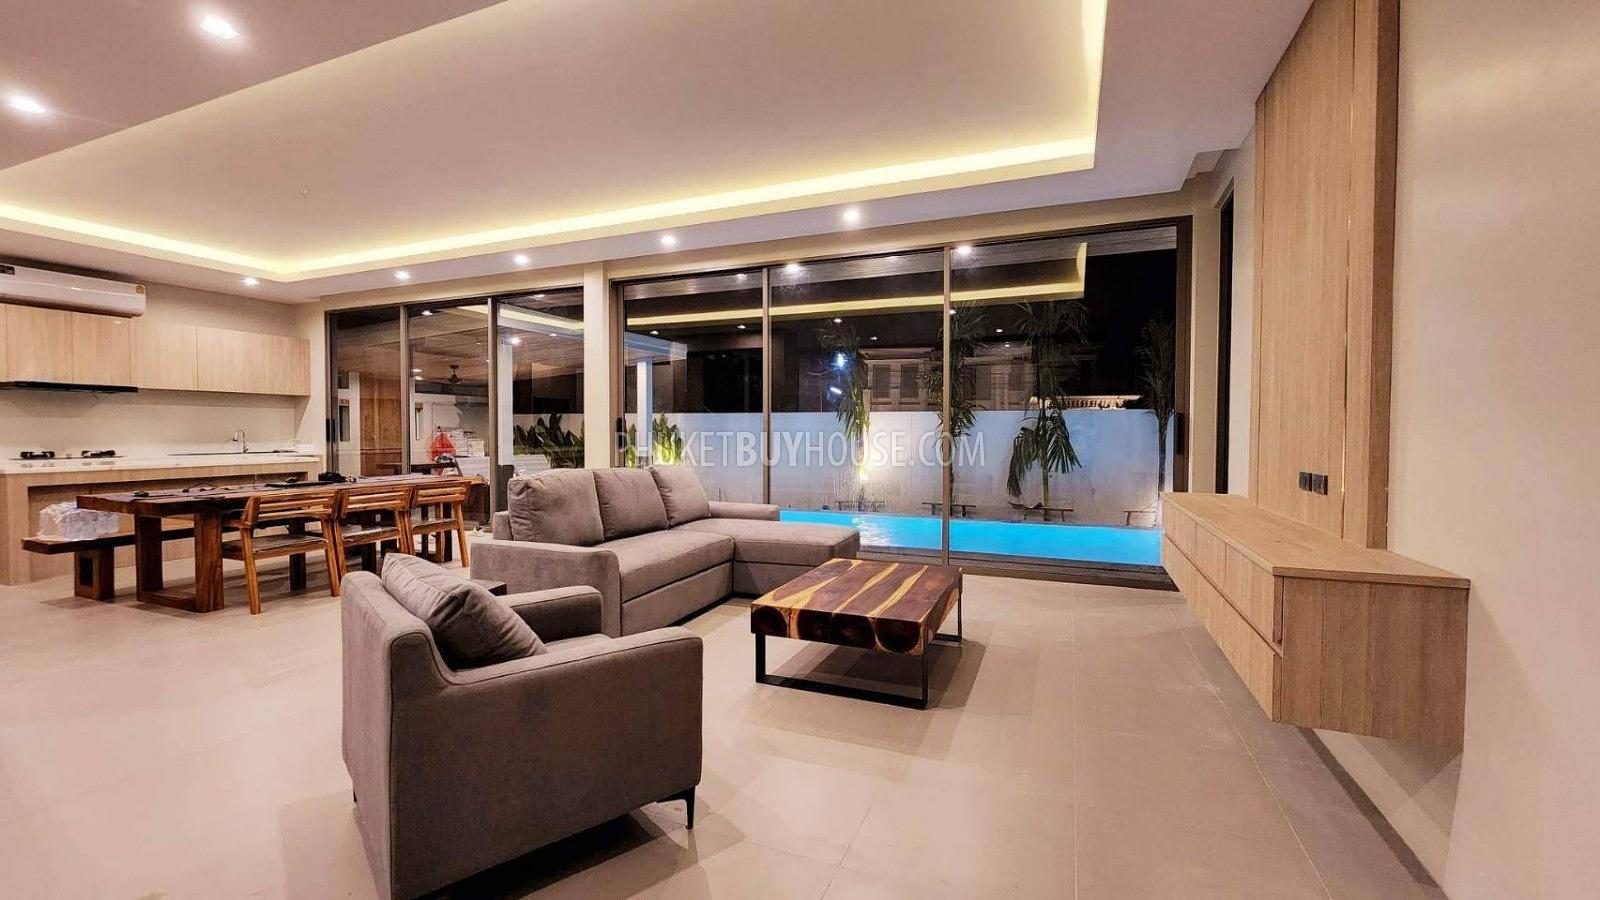 CHA22041: Modern Villa with 4 Bedrooms For Sale in Chalong. Photo #12